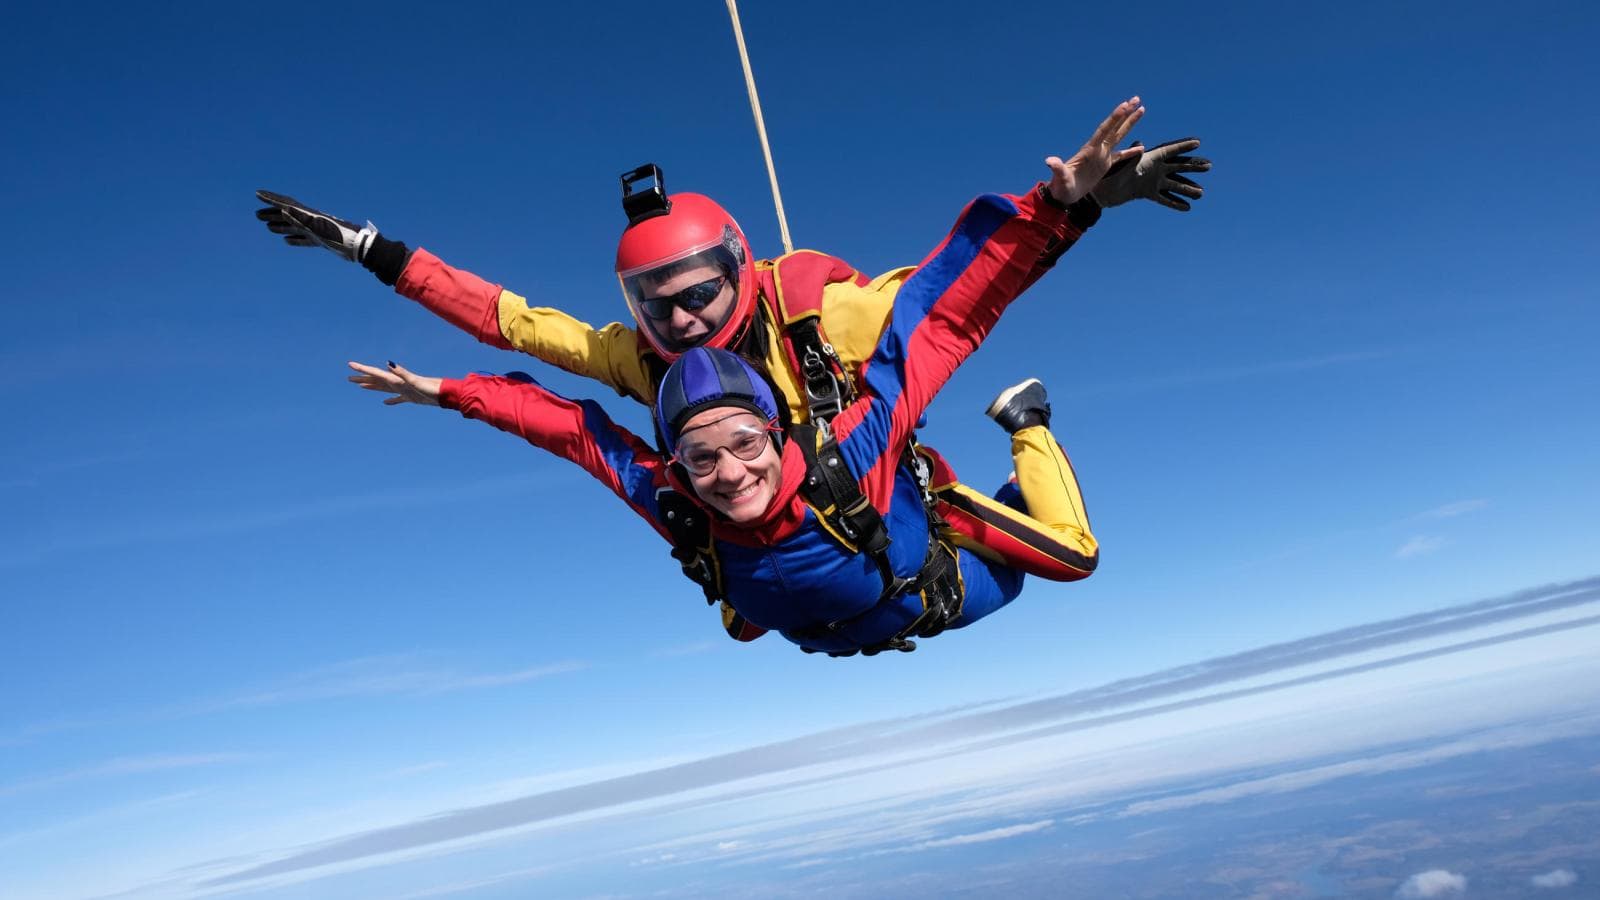 man and woman skydiving